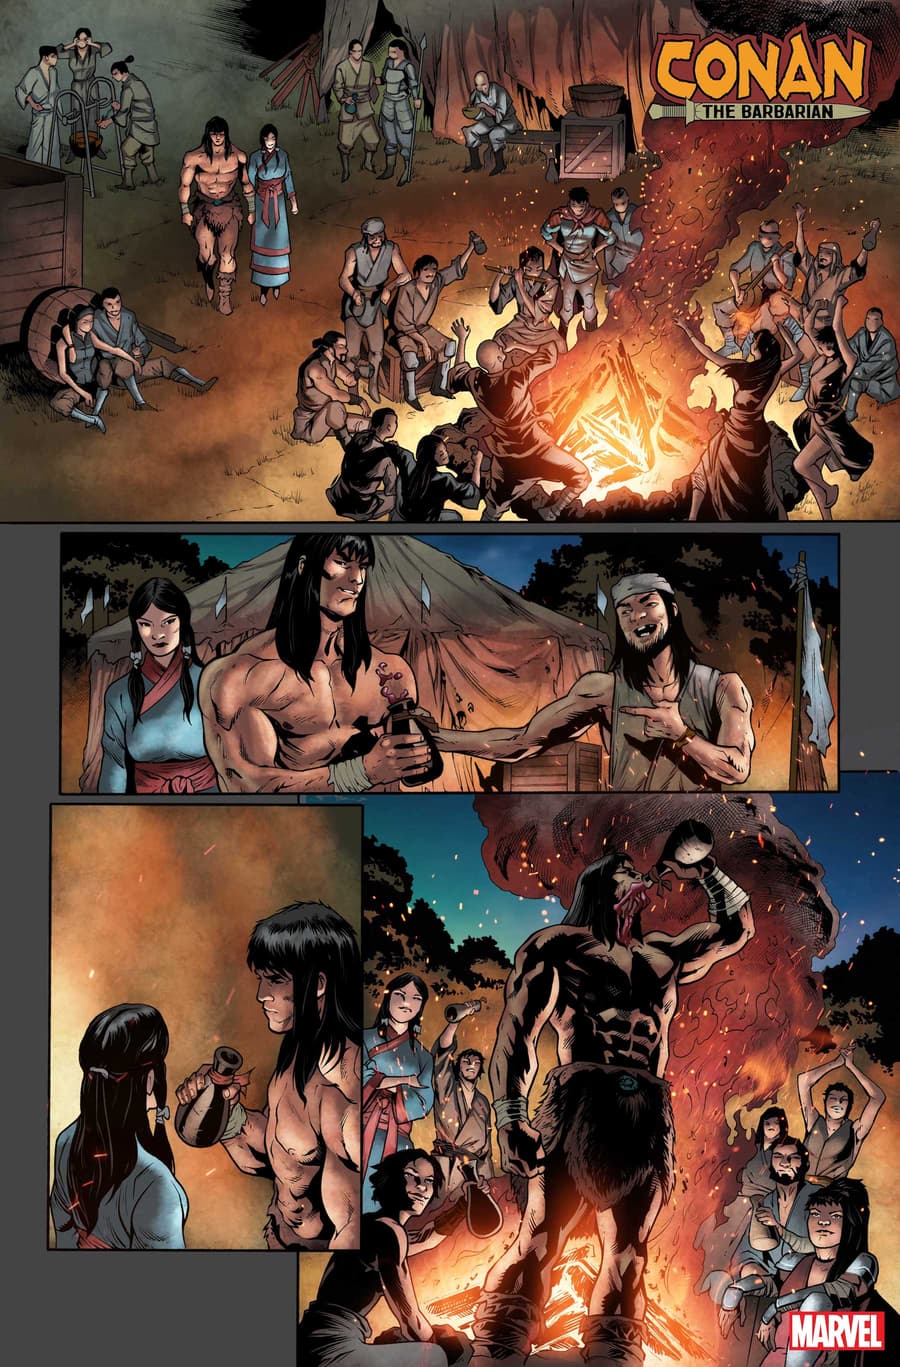 CONAN THE BARBARIAN #20 pencils by Cory Smith, inks by Roberto Poggi, and colors by Israel Silva